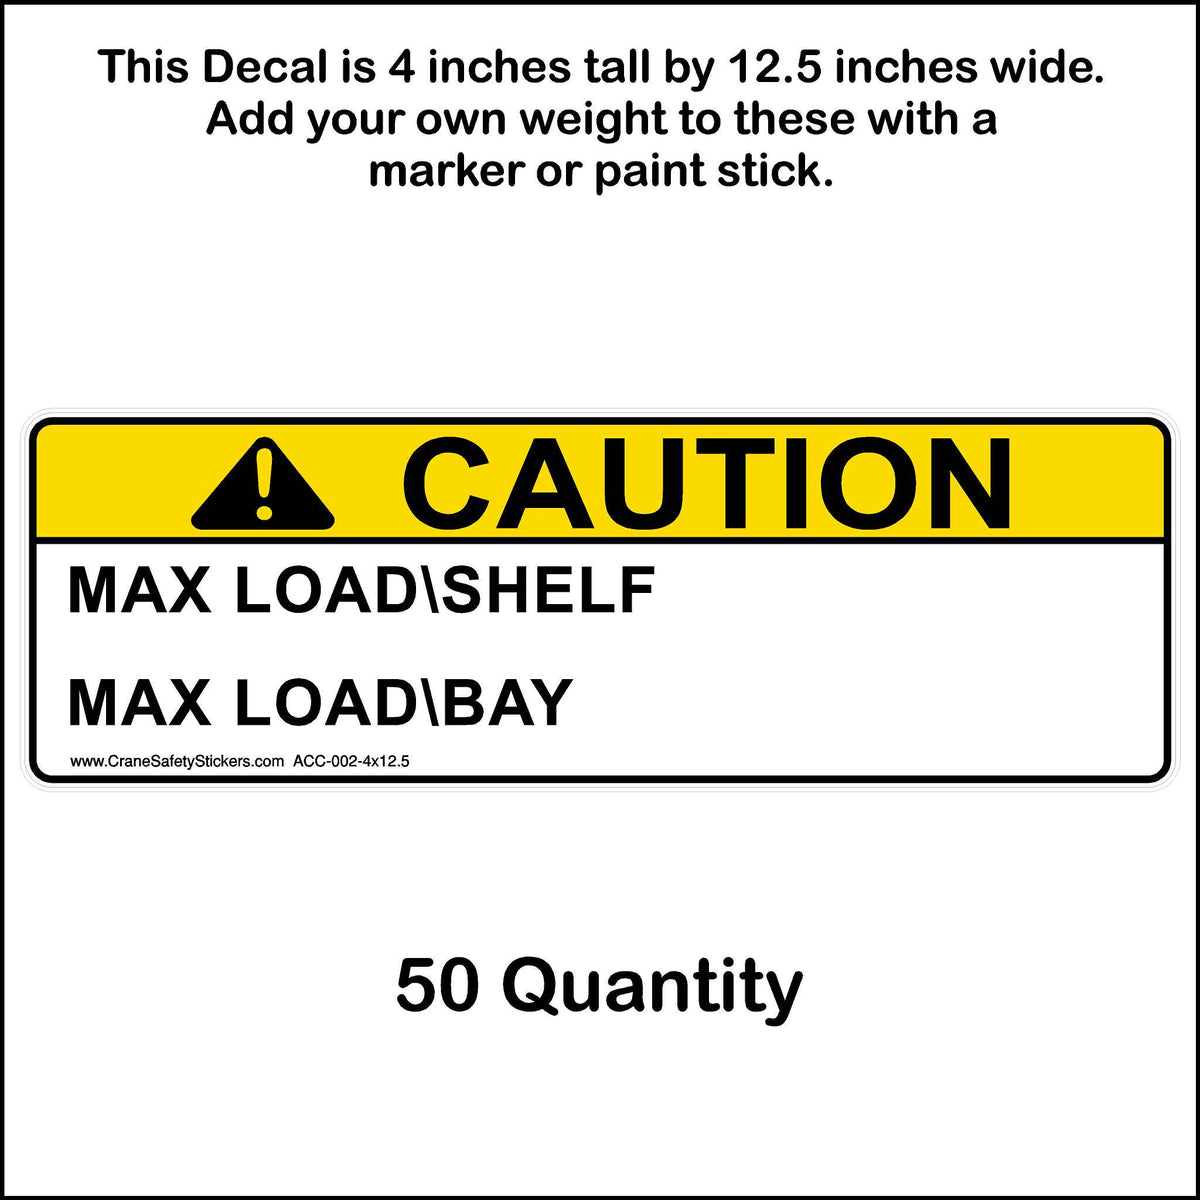 4 inch by 12.5 inch Max load shelf and max load bay sticker 50 quantity.